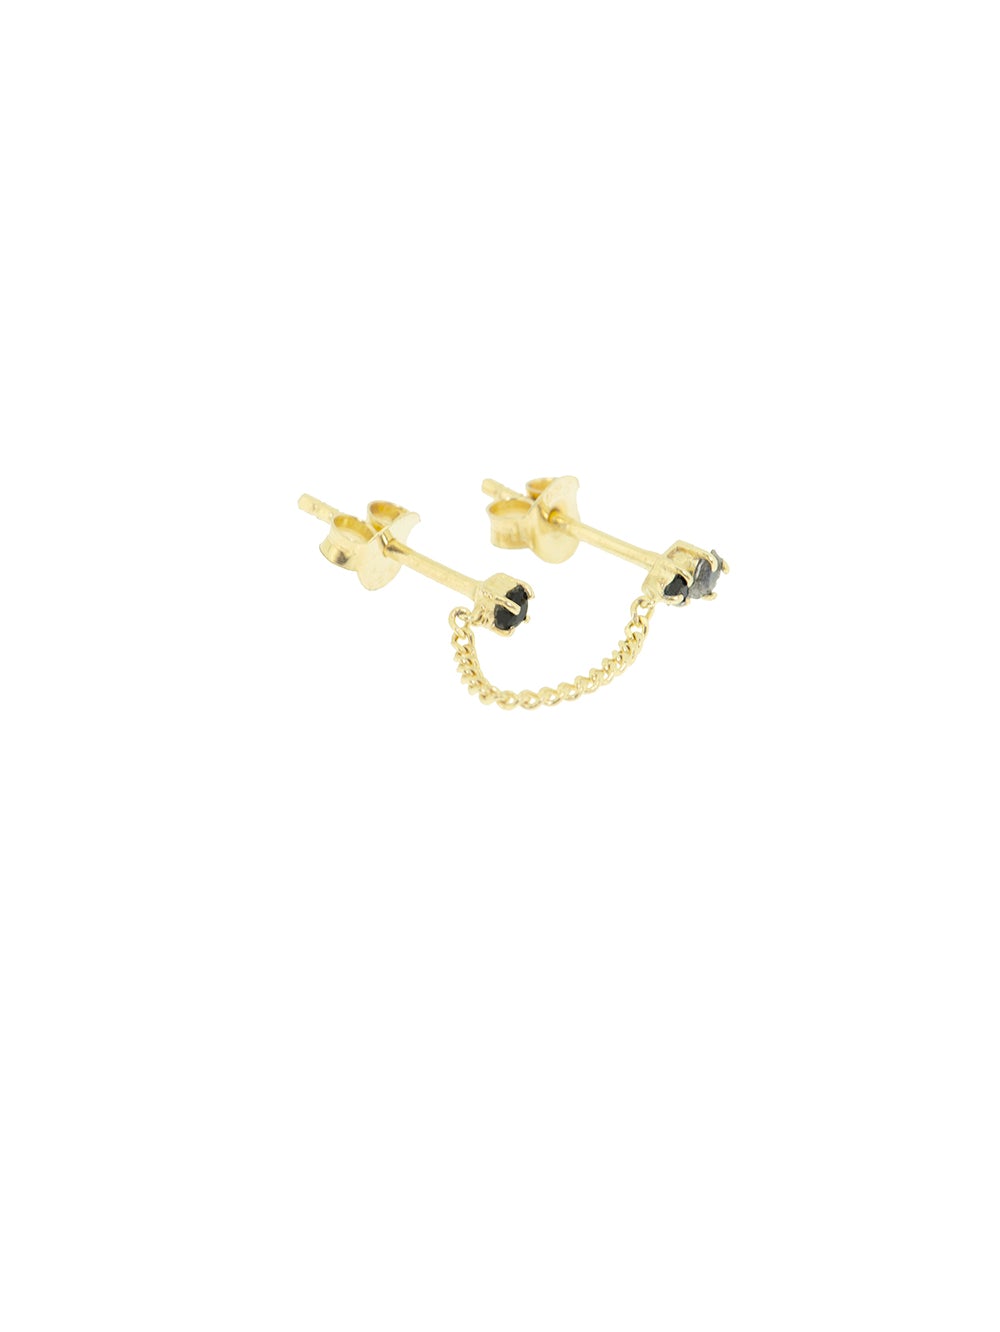 STAY THE NIGHT earstuds⎜Goldplated⎜Onyx labradorite